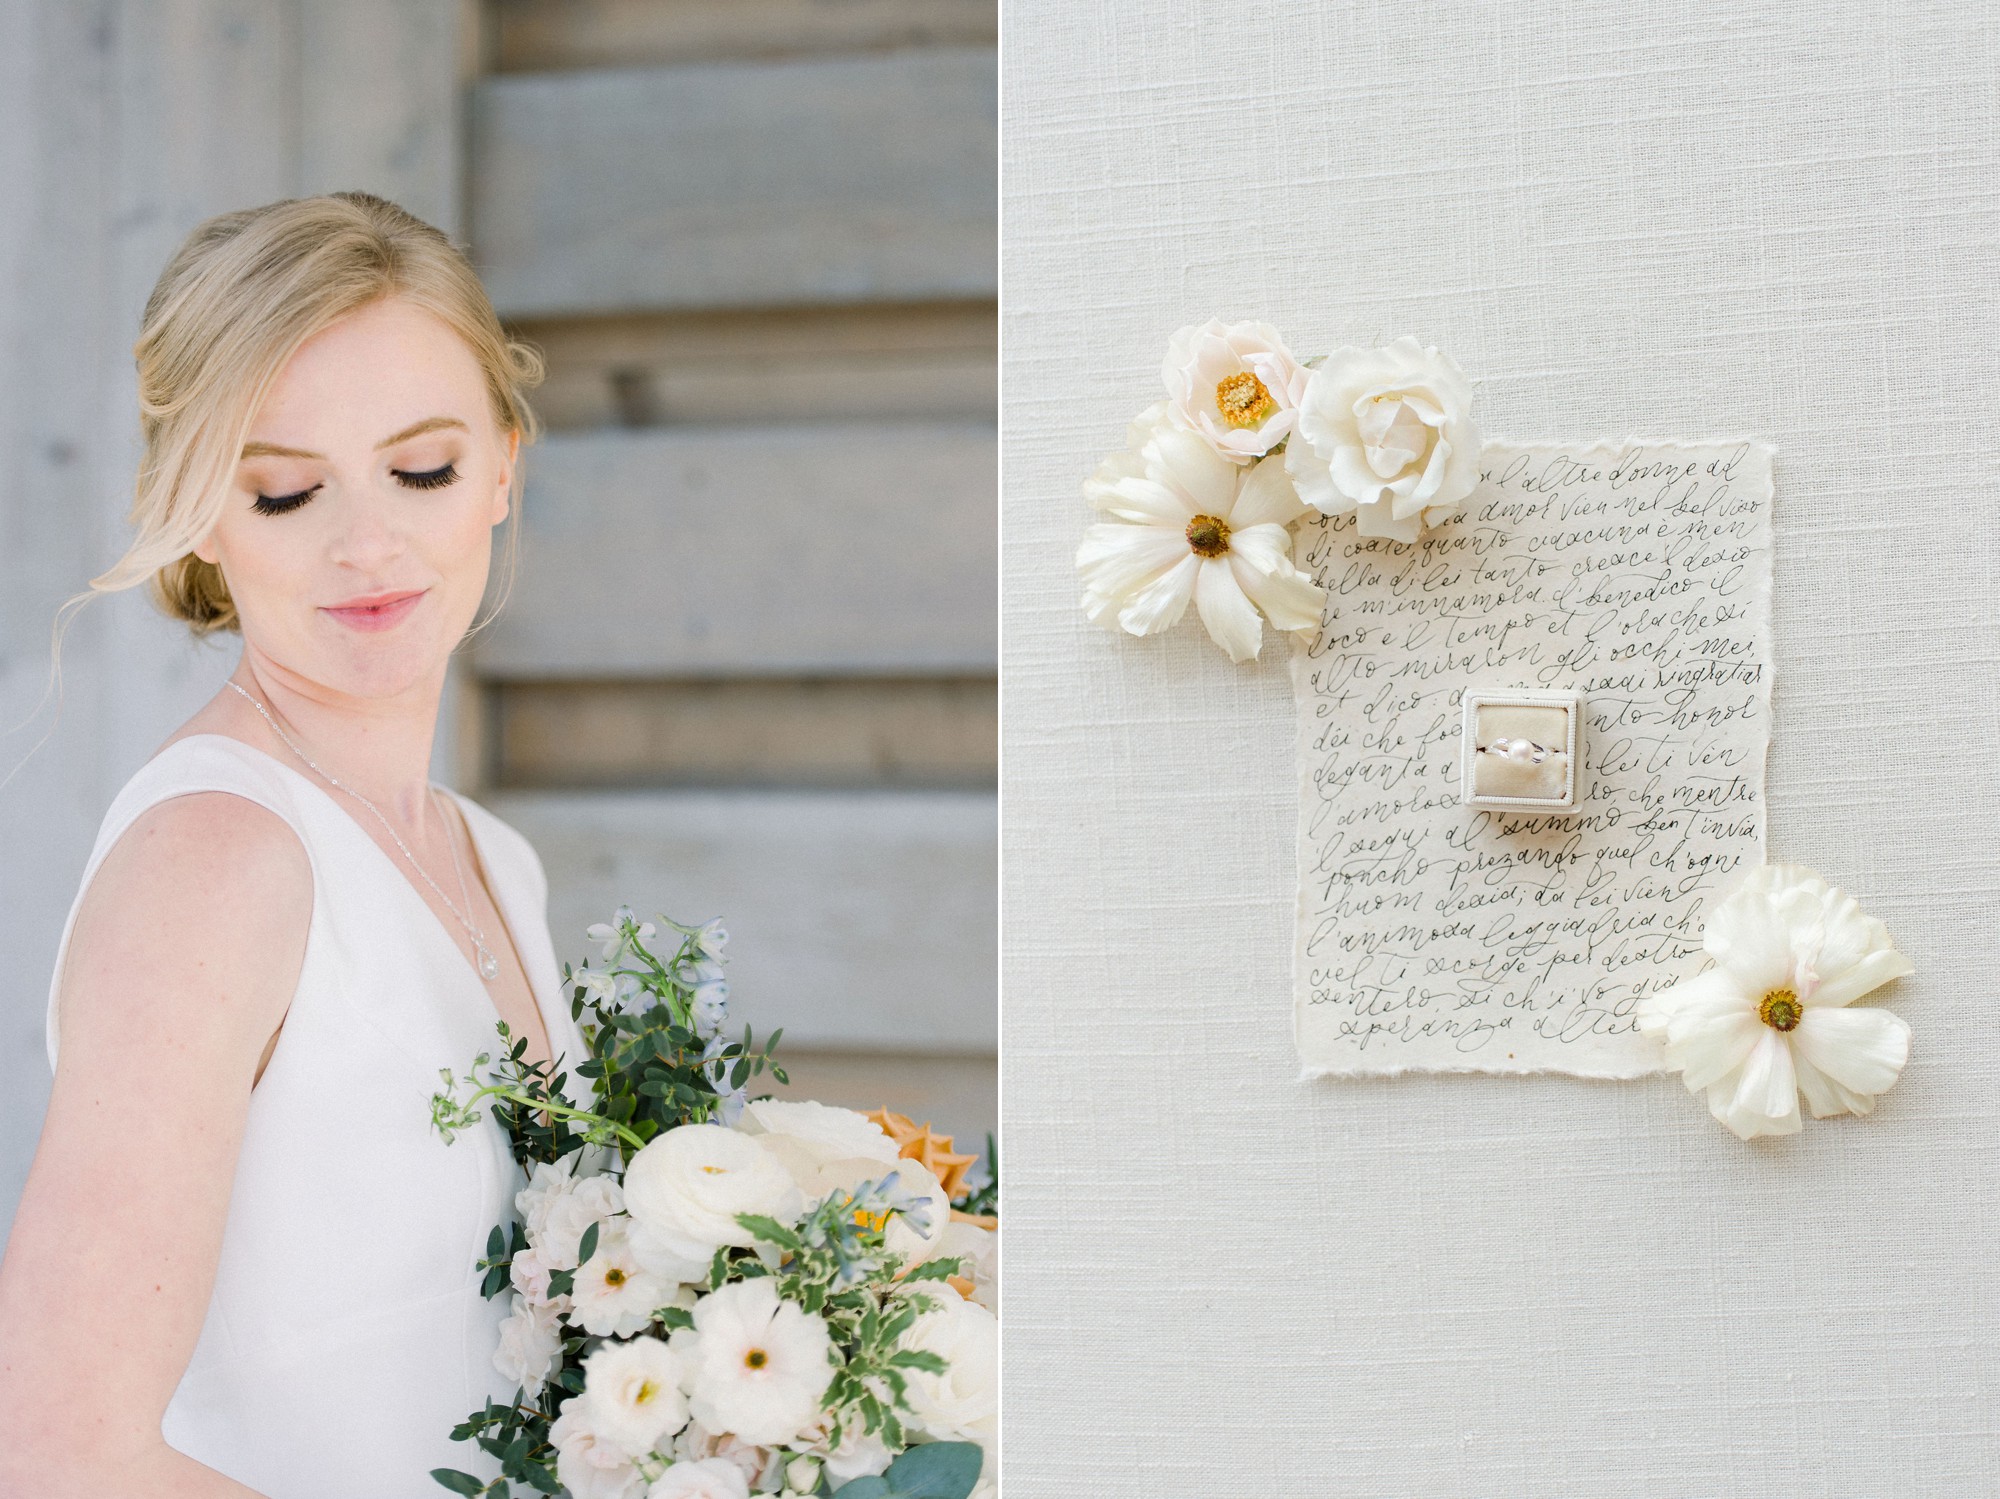 Gloucester MA Beauport Hotel Wedding | Tuscan meets modern | Italian love poem calligraphy and flowers styled wedding flat lay and modern bridal makeup and dress